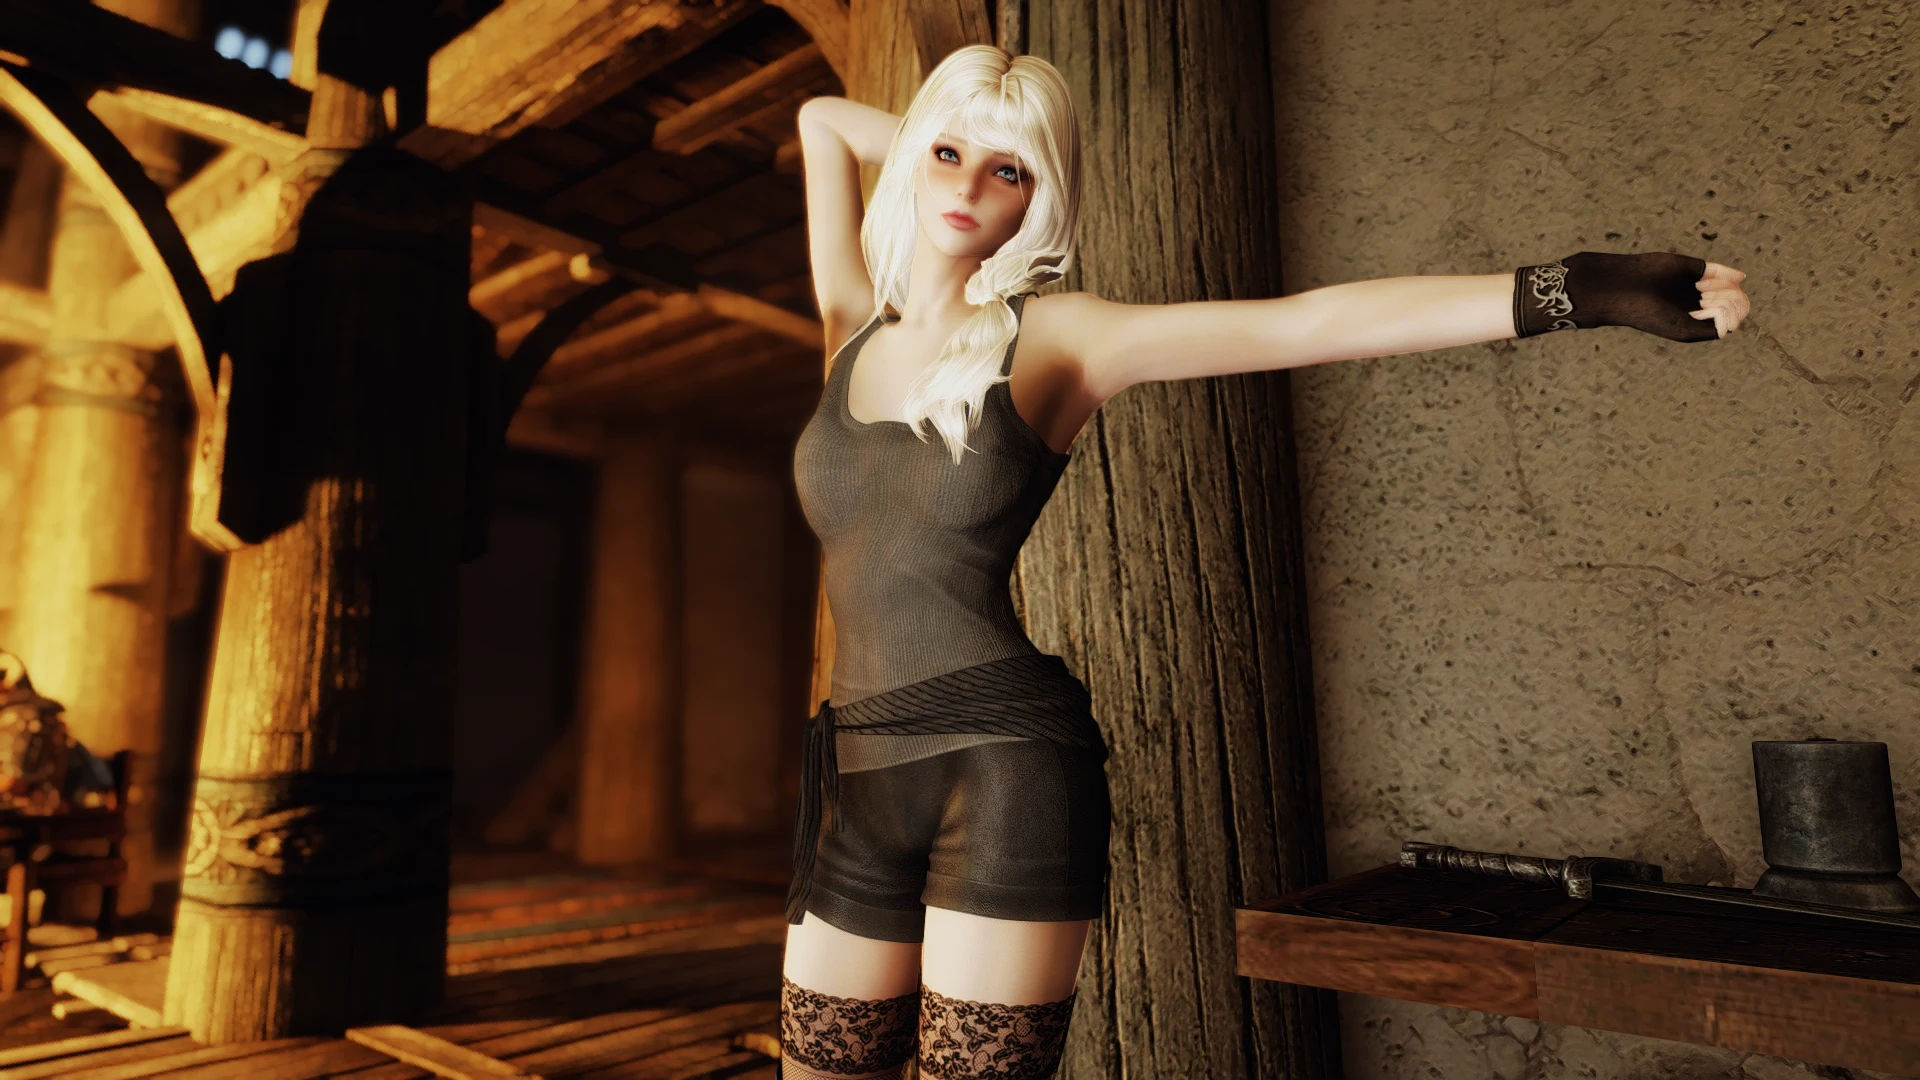 the lily sse cbbe bodyslide at skyrim special edition nexus mods and commun...